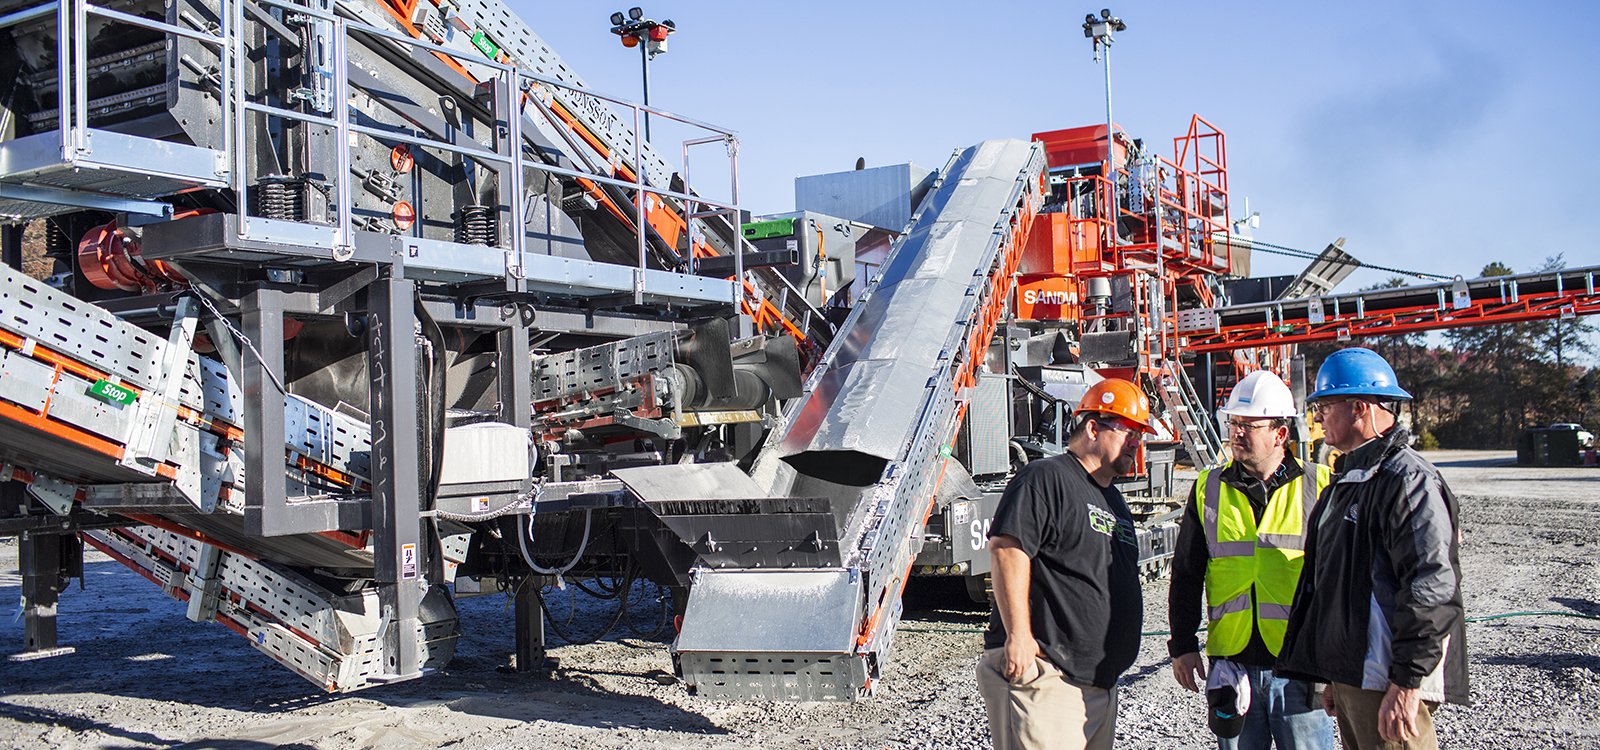 The quarry invested in a mobile plant primarily because it provides pit design flexibility.